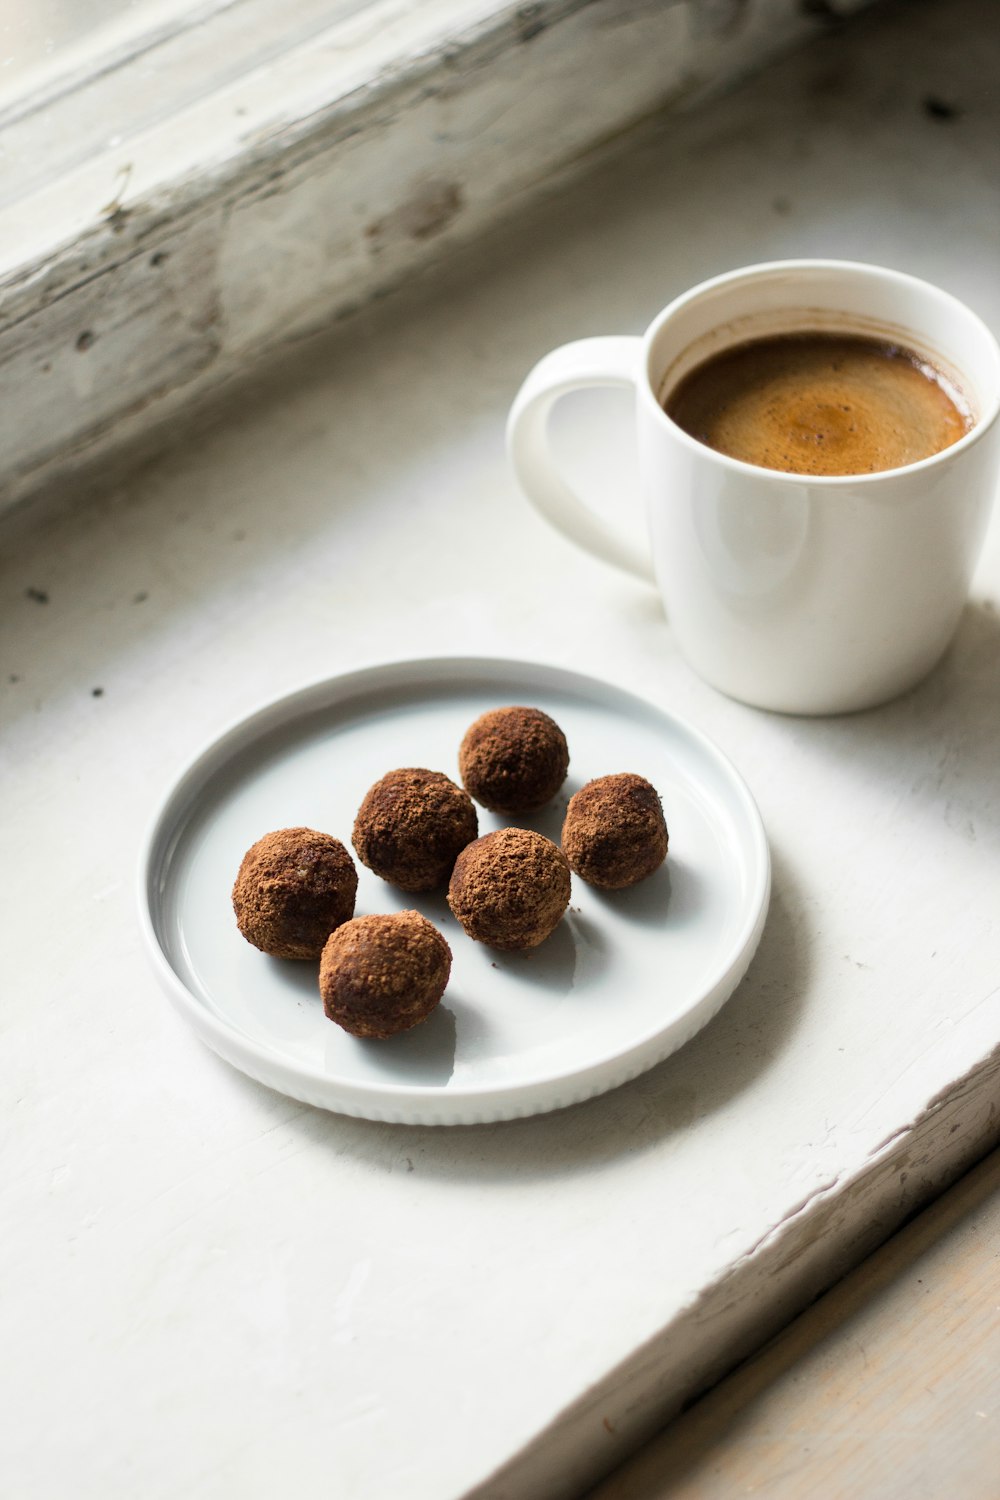 a cup of coffee next to a plate of chocolate truffles